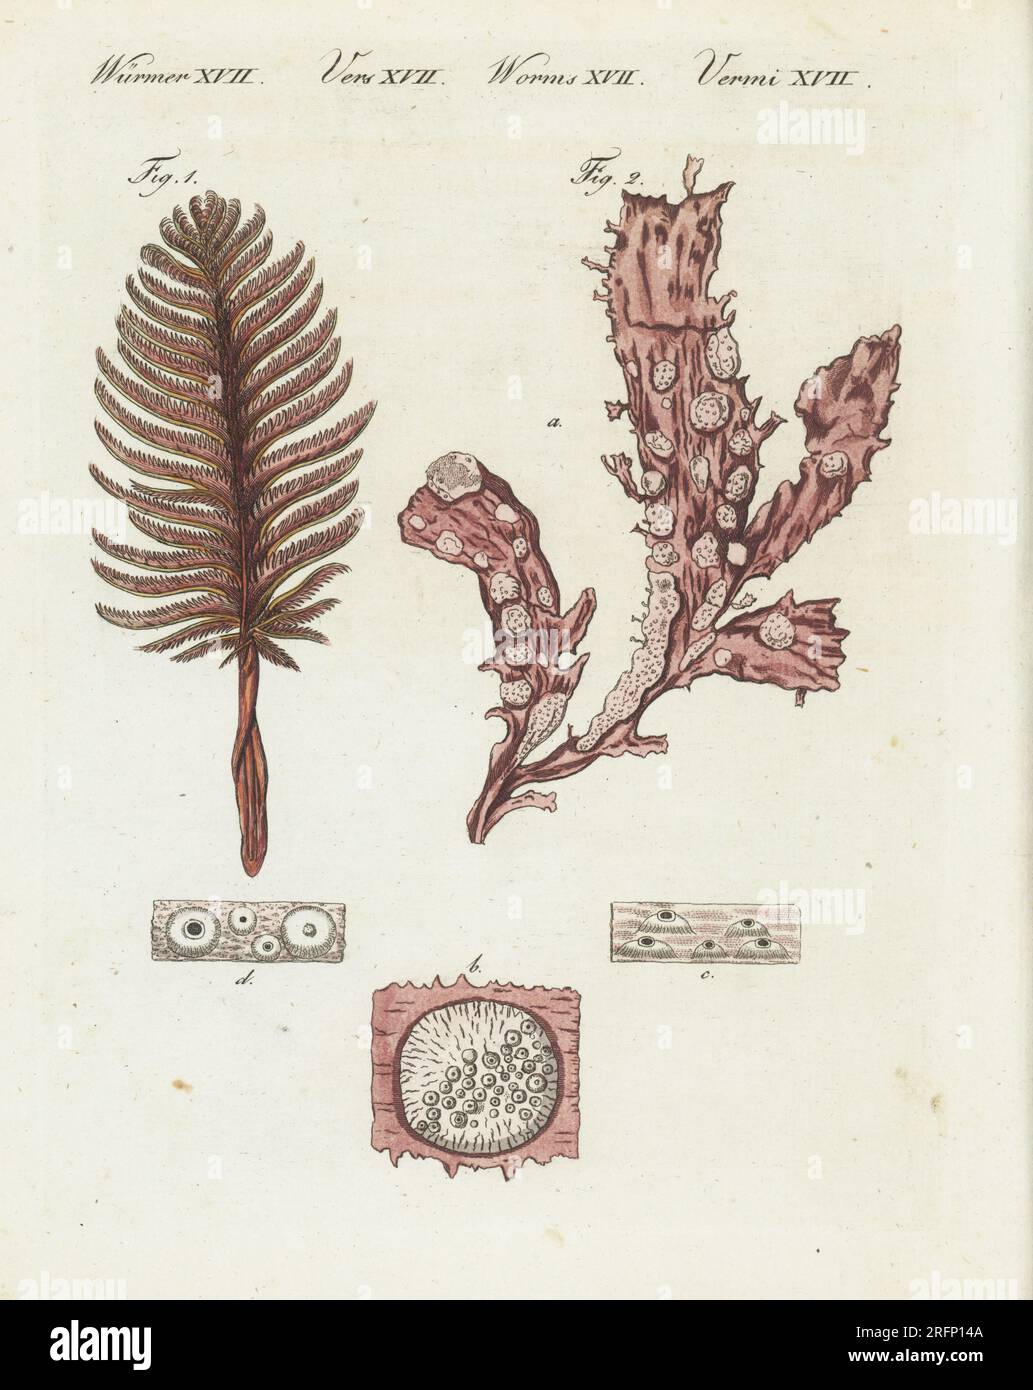 Bristly sea-pen, Pennatula rubra 1, and membranous melobesia, Melobesia membranacea 2, a small marine alga that grows on the surface of other algae. (Pennatula setacea, Corallina membranacea.) Handcoloured copperplate engraving from Carl Bertuch's Bilderbuch fur Kinder (Picture Book for Children), Weimar, 1810. A 12-volume encyclopedia for children illustrated with almost 1,200 engraved plates on natural history, science, costume, mythology, etc., published from 1790-1830. Stock Photo